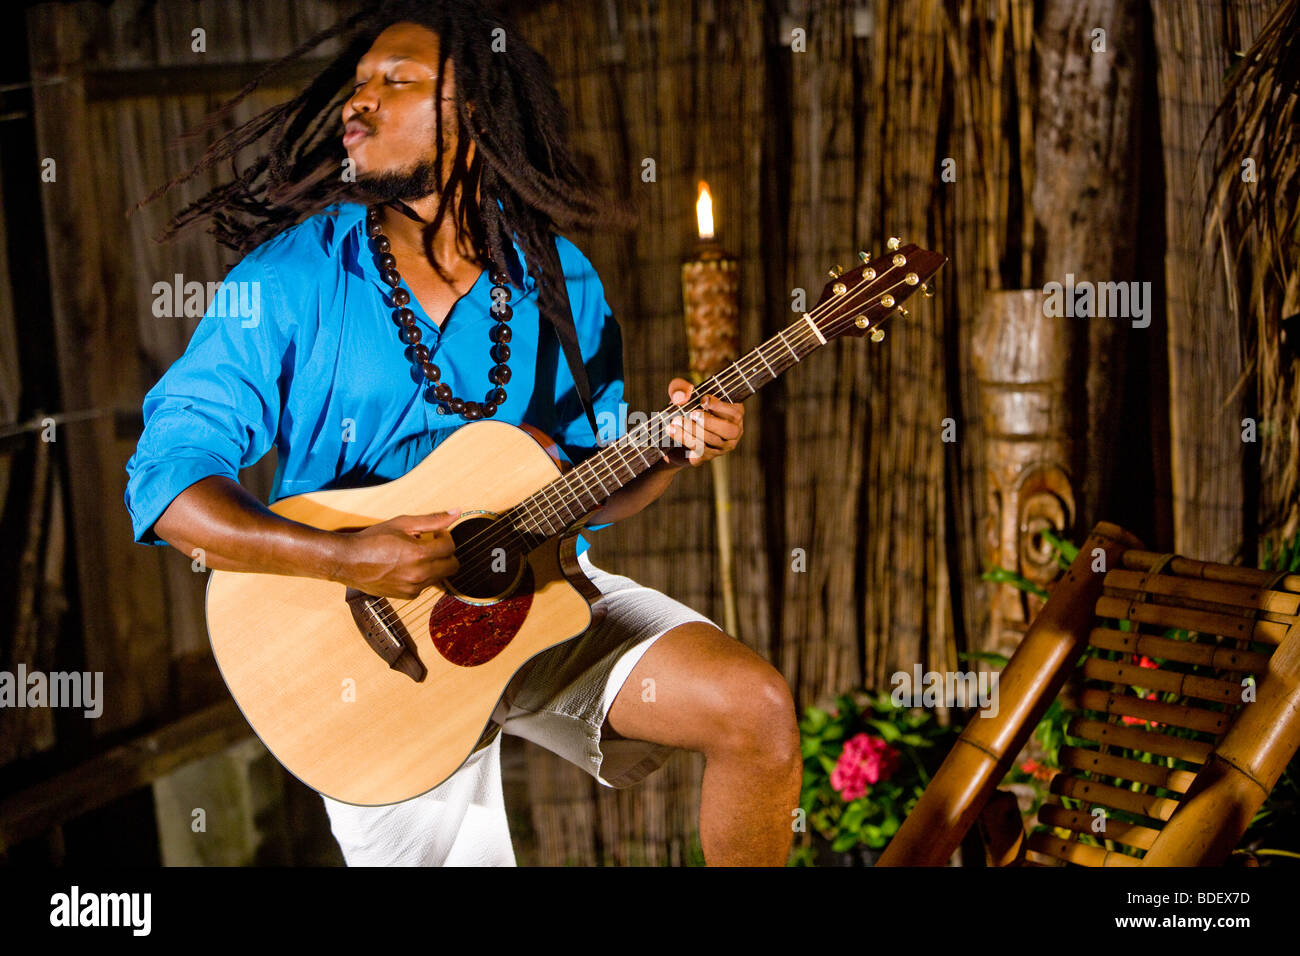 Young Jamaican man with dreadlocks playing guitar on tropical island Stock Photo